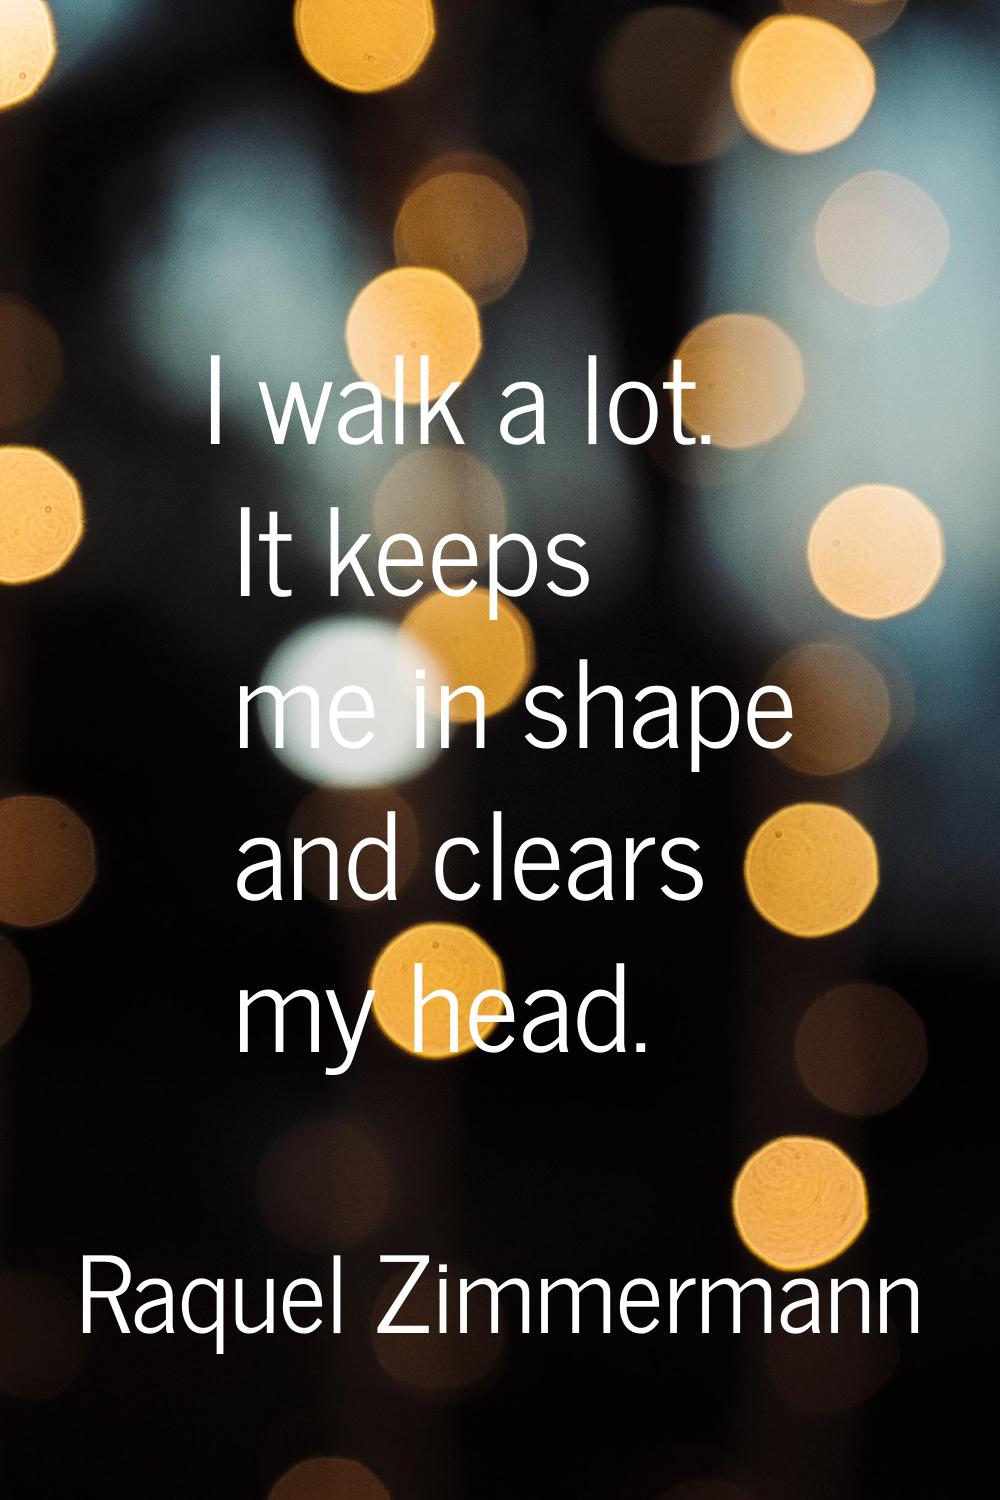 I walk a lot. It keeps me in shape and clears my head.